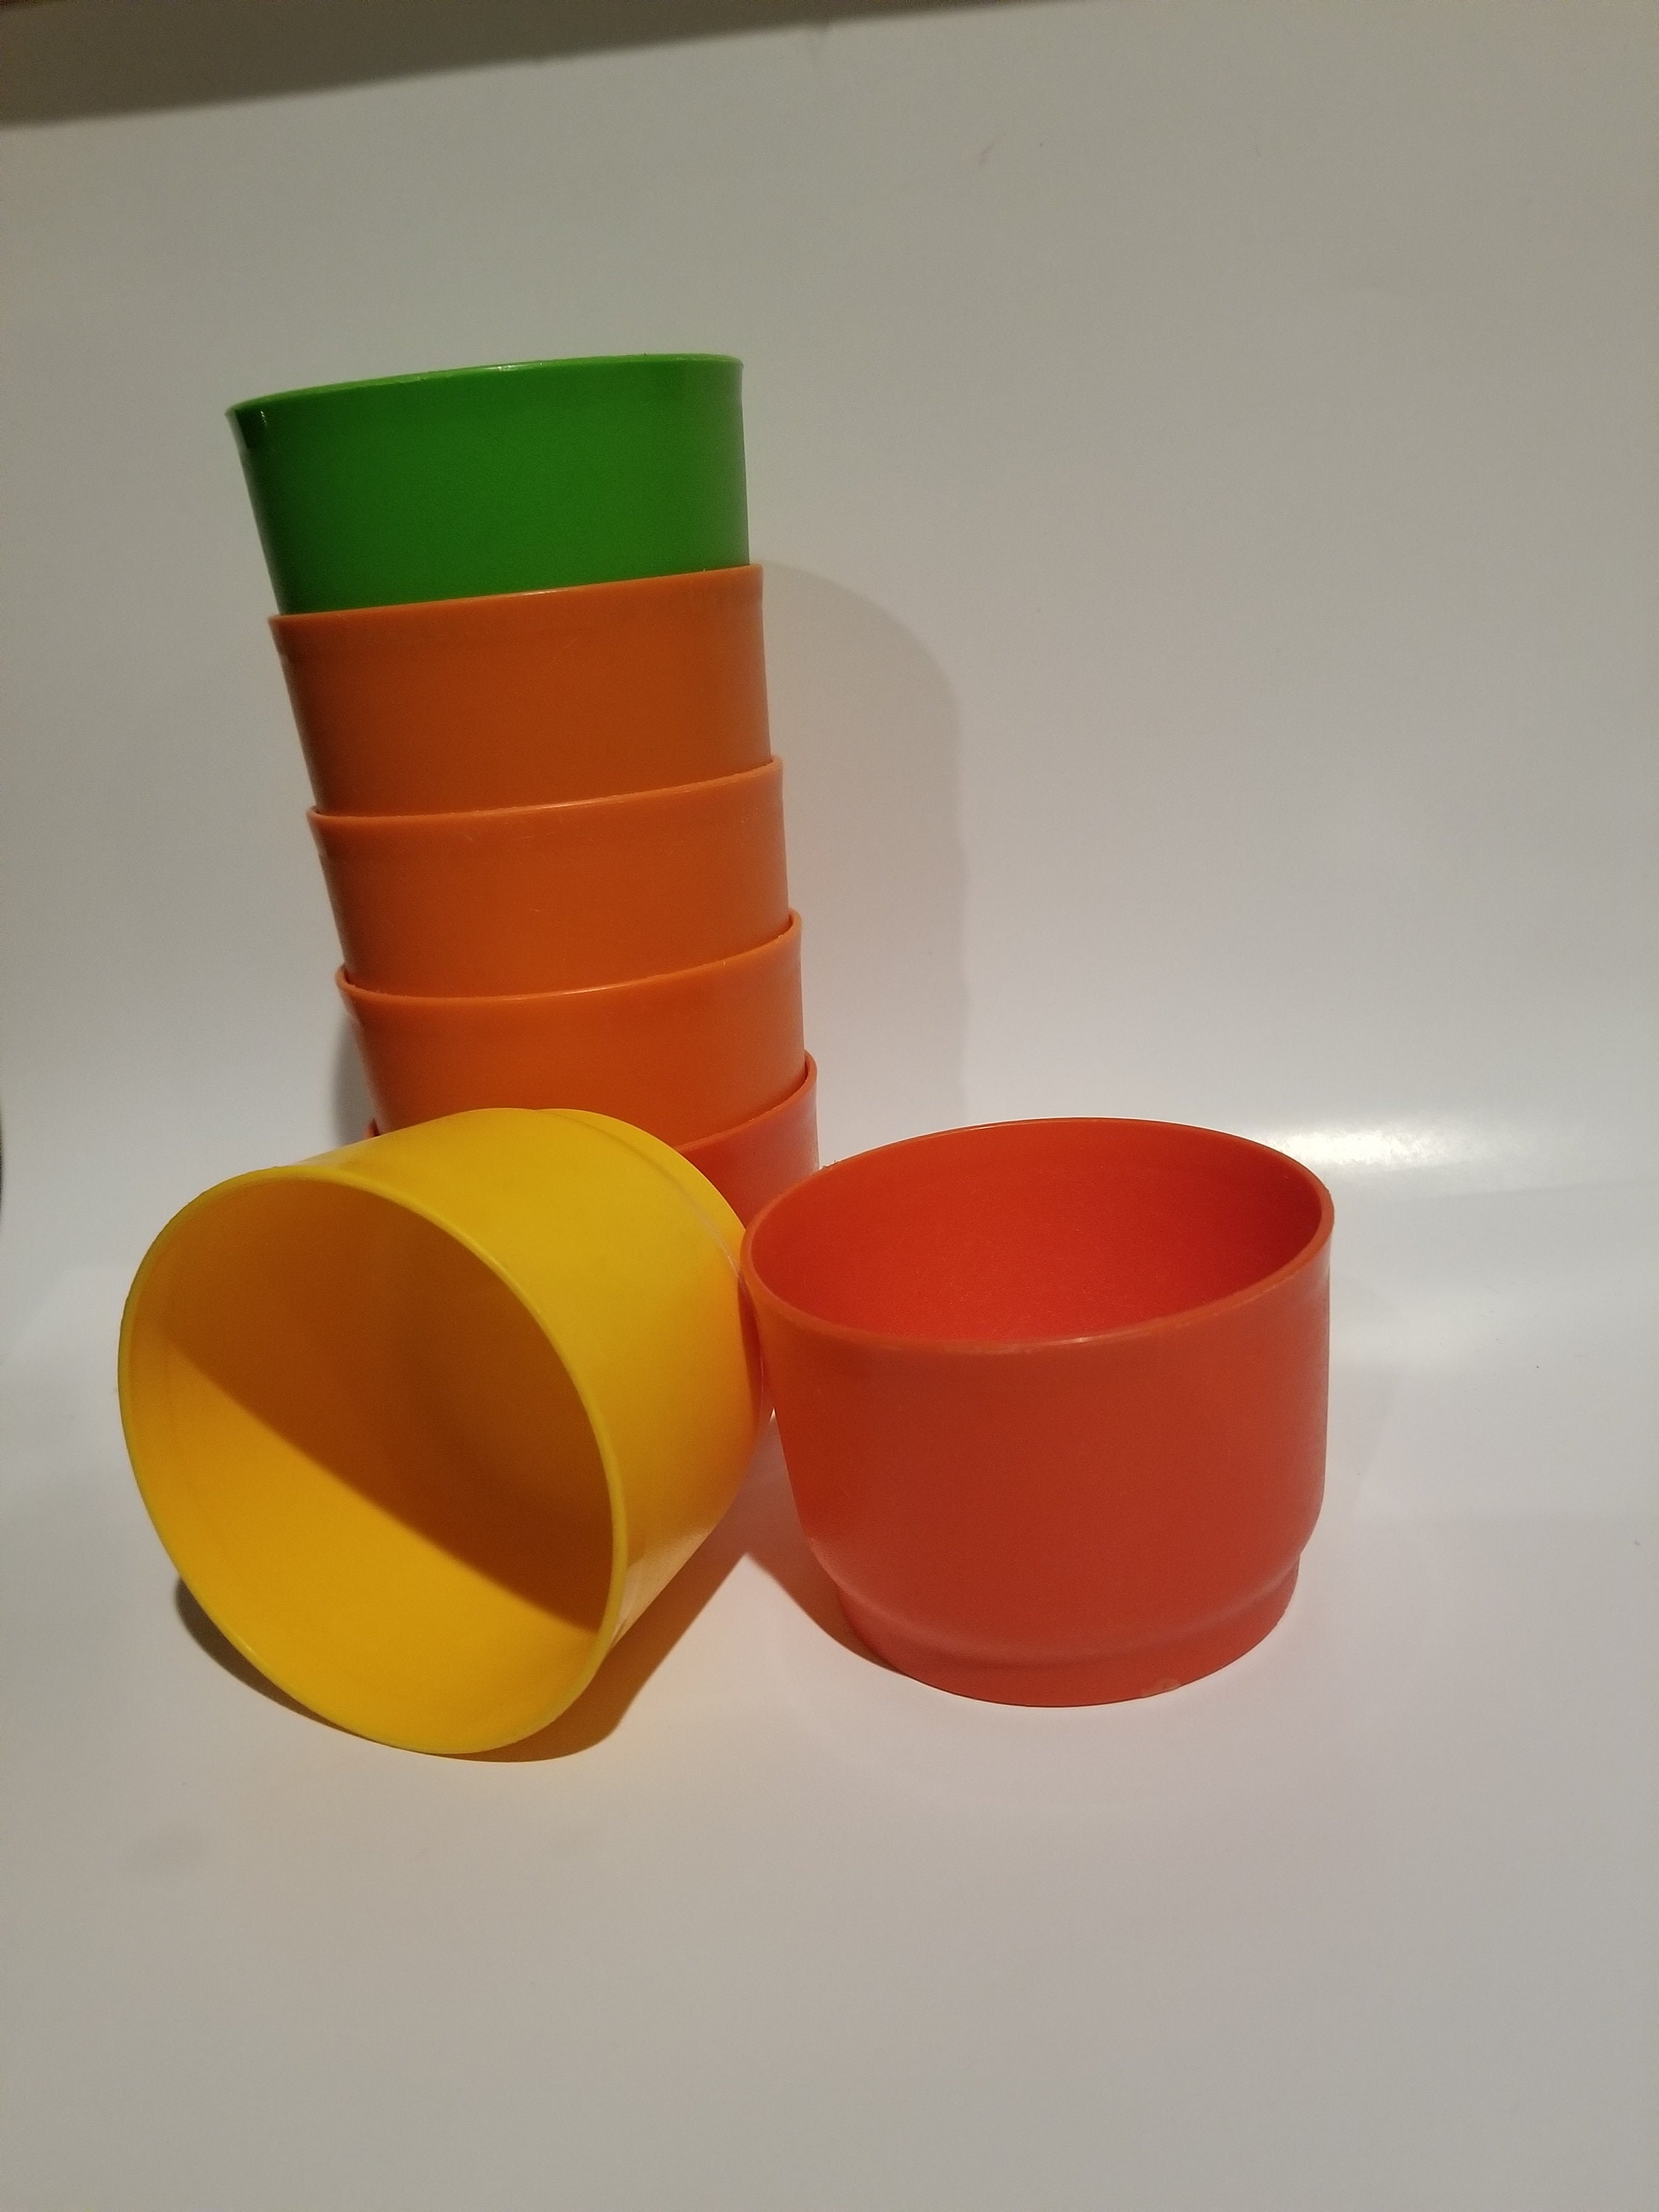 Vintage Tupperware 4 oz Snack Cups / Lunchbox replacement cup